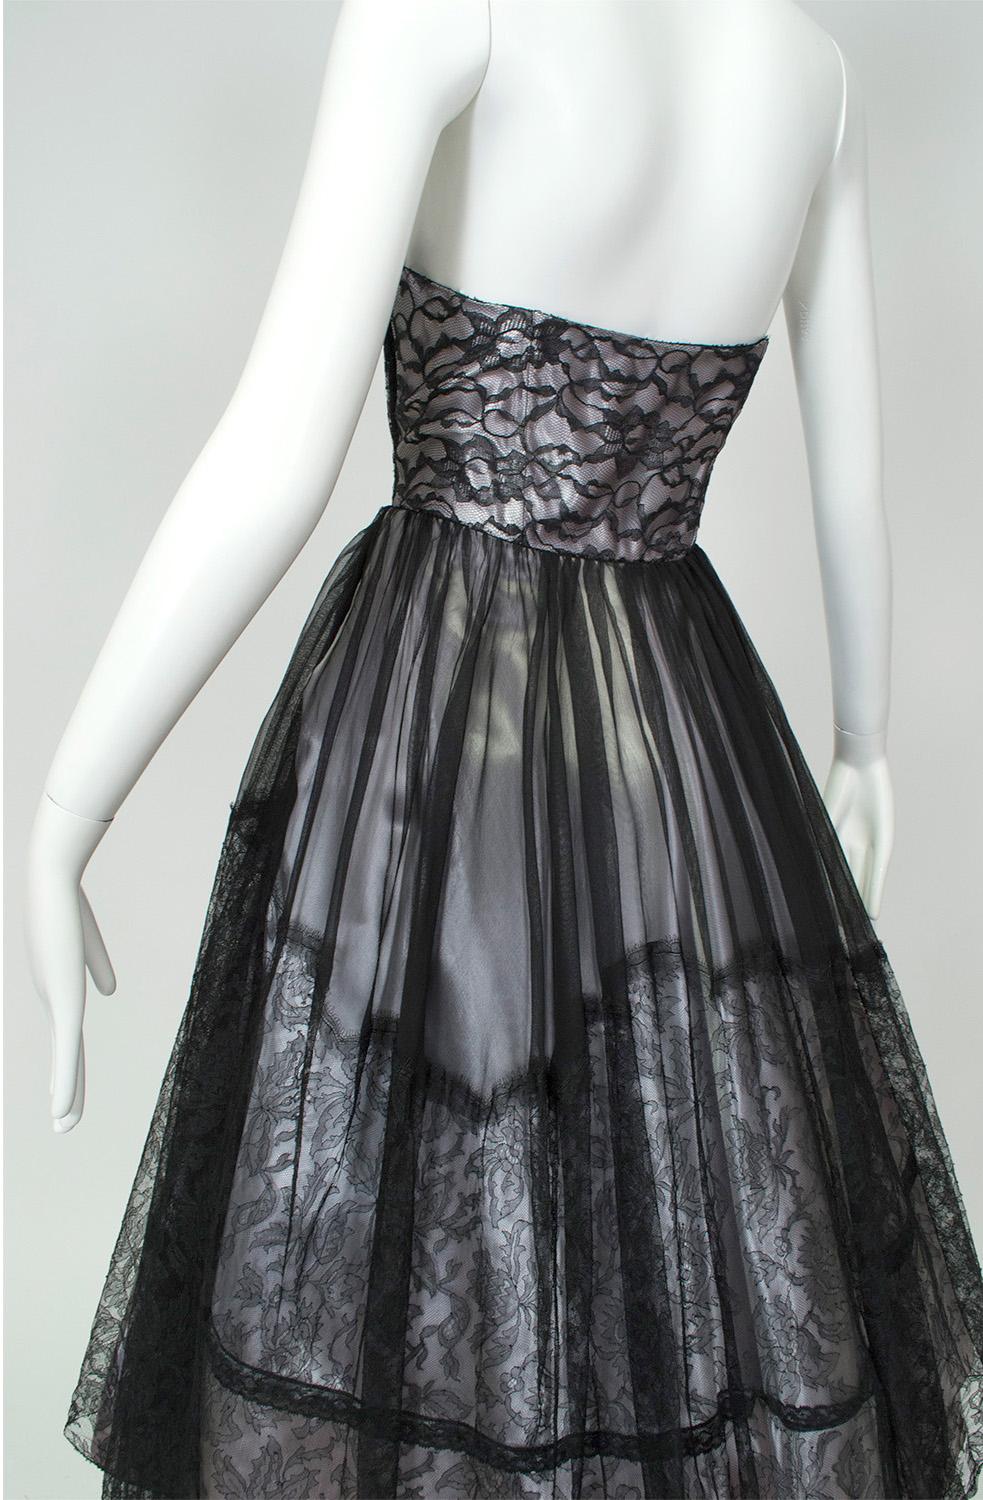 Black and Silver *Larger Size* Ombré New Look Strapless Party Dress – L, 1950s In Good Condition For Sale In Tucson, AZ